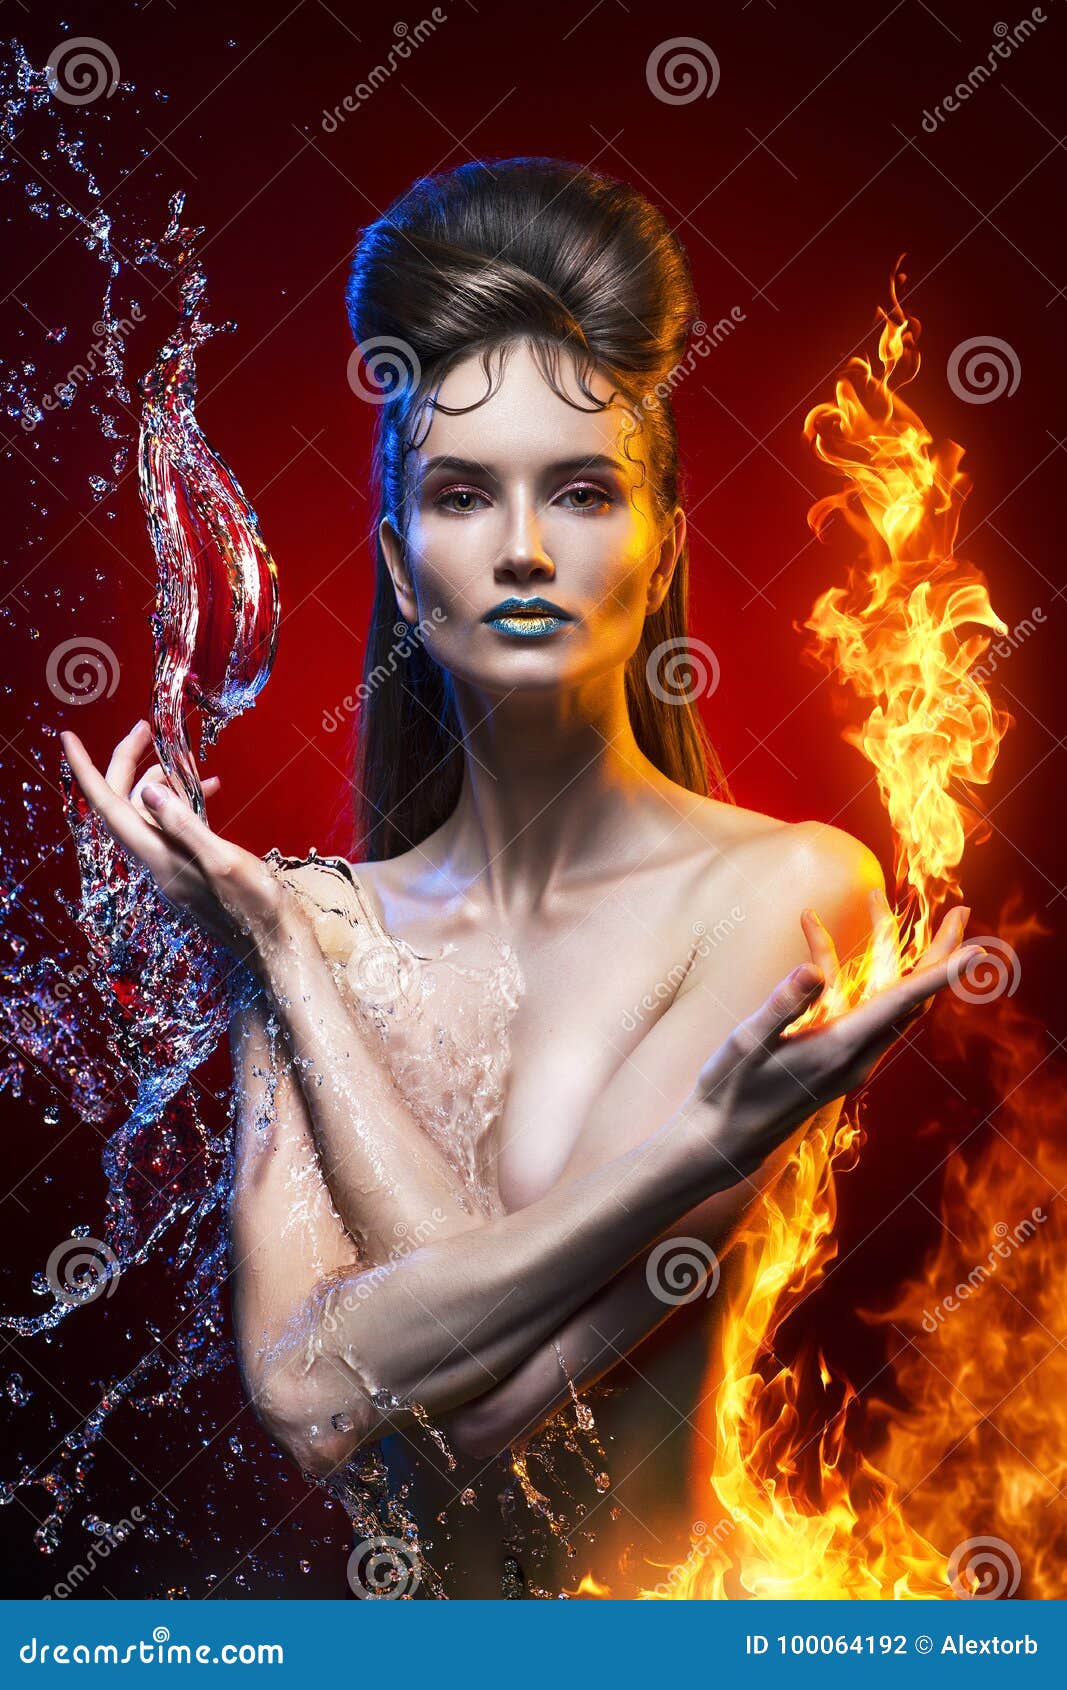 Nude women with fire - Real Naked Girls